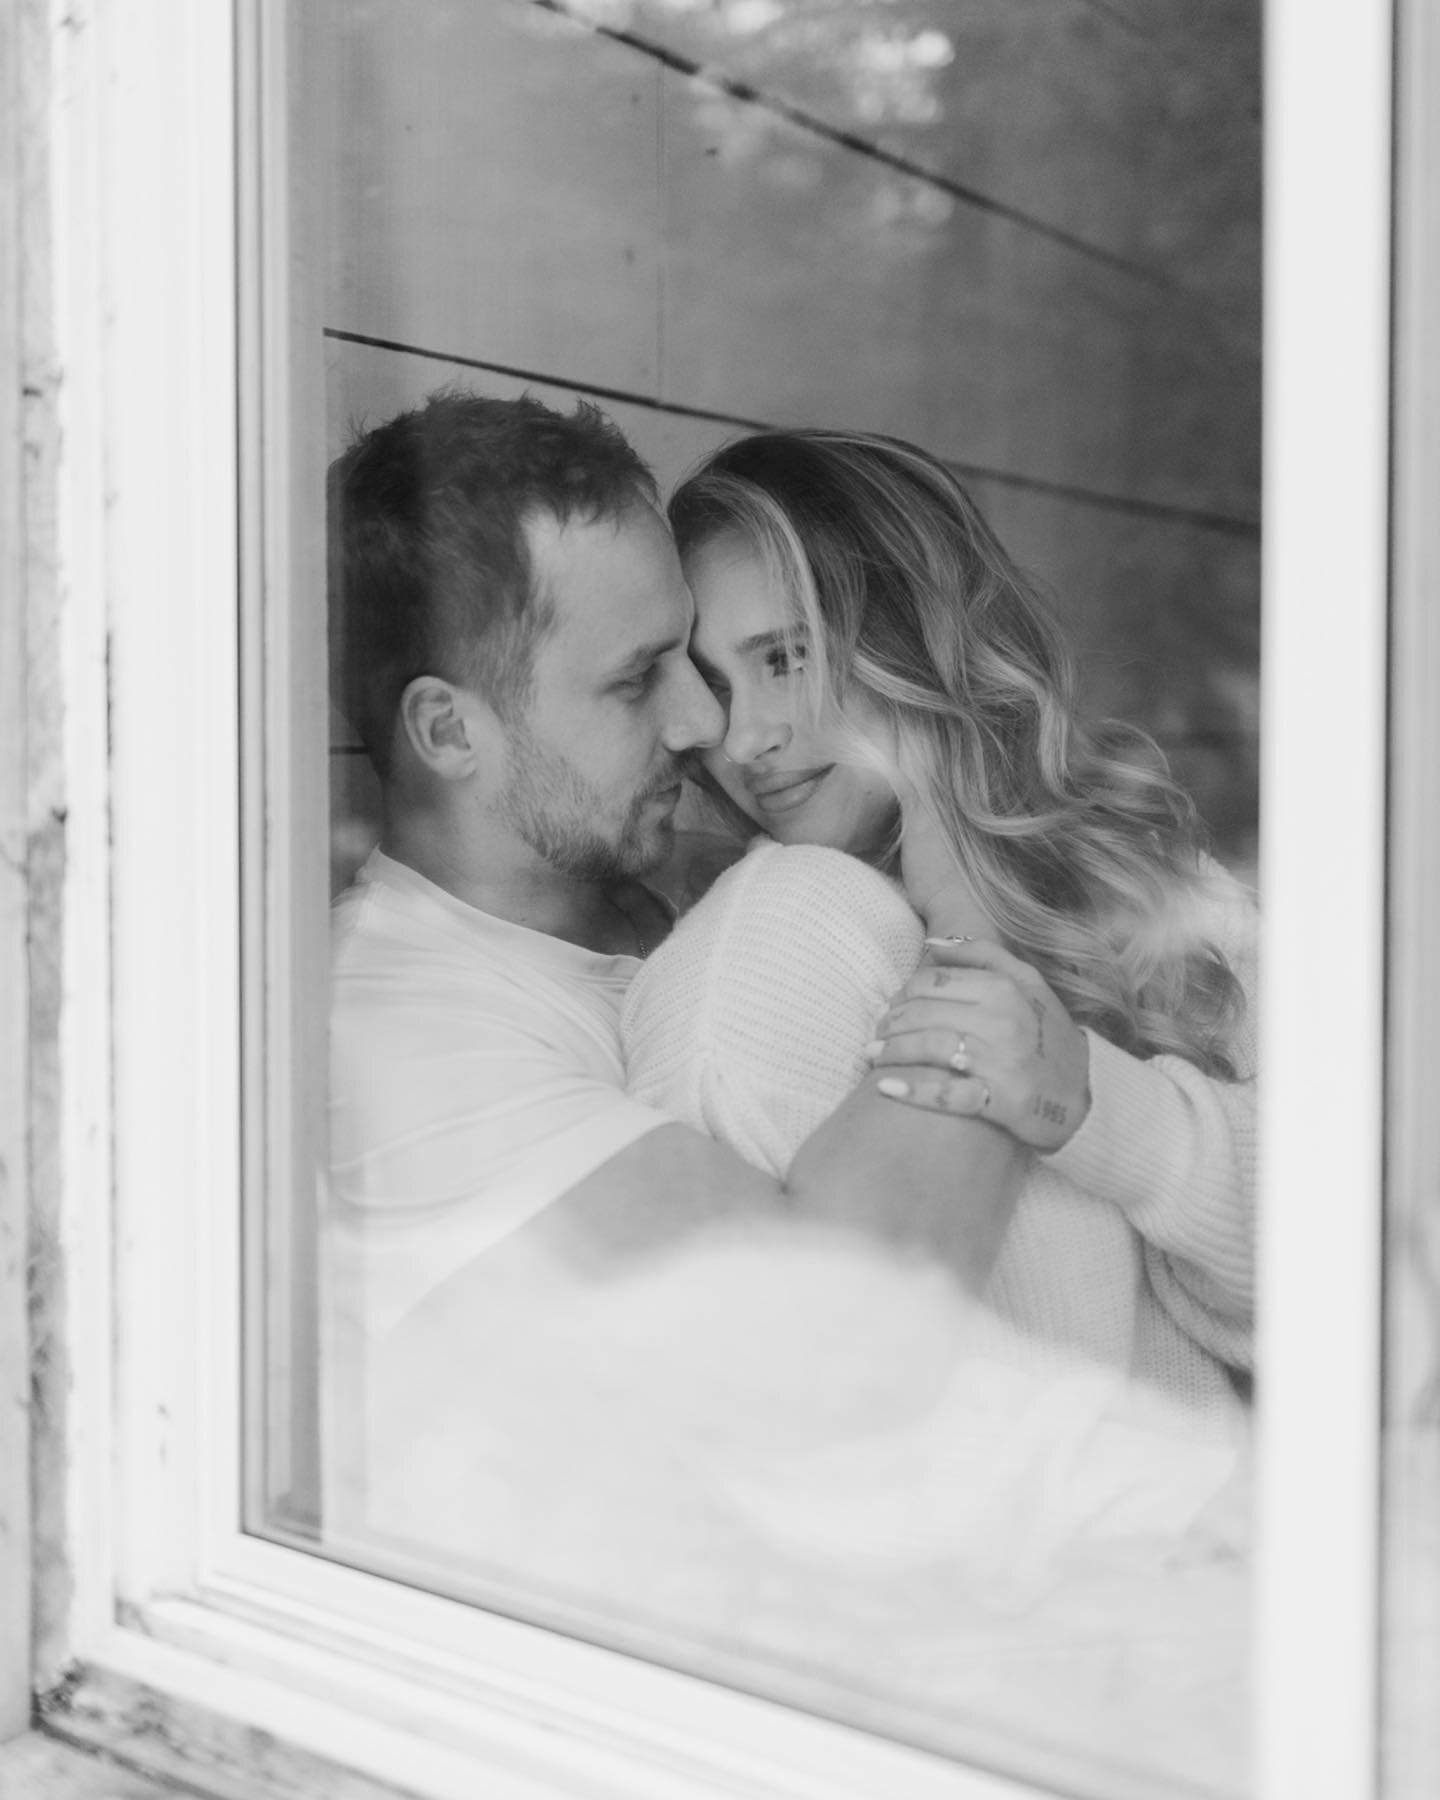 A few favourites from my time with Sarah + Rudy&rsquo;s in a cozy cabin in the woods 

#authenticlovemag #engagementphotos #engagementphotos #torontoweddingphotographer #torontowedding #ontarioweddingphotographer #cottagewedding #cottagecore #airbnb 